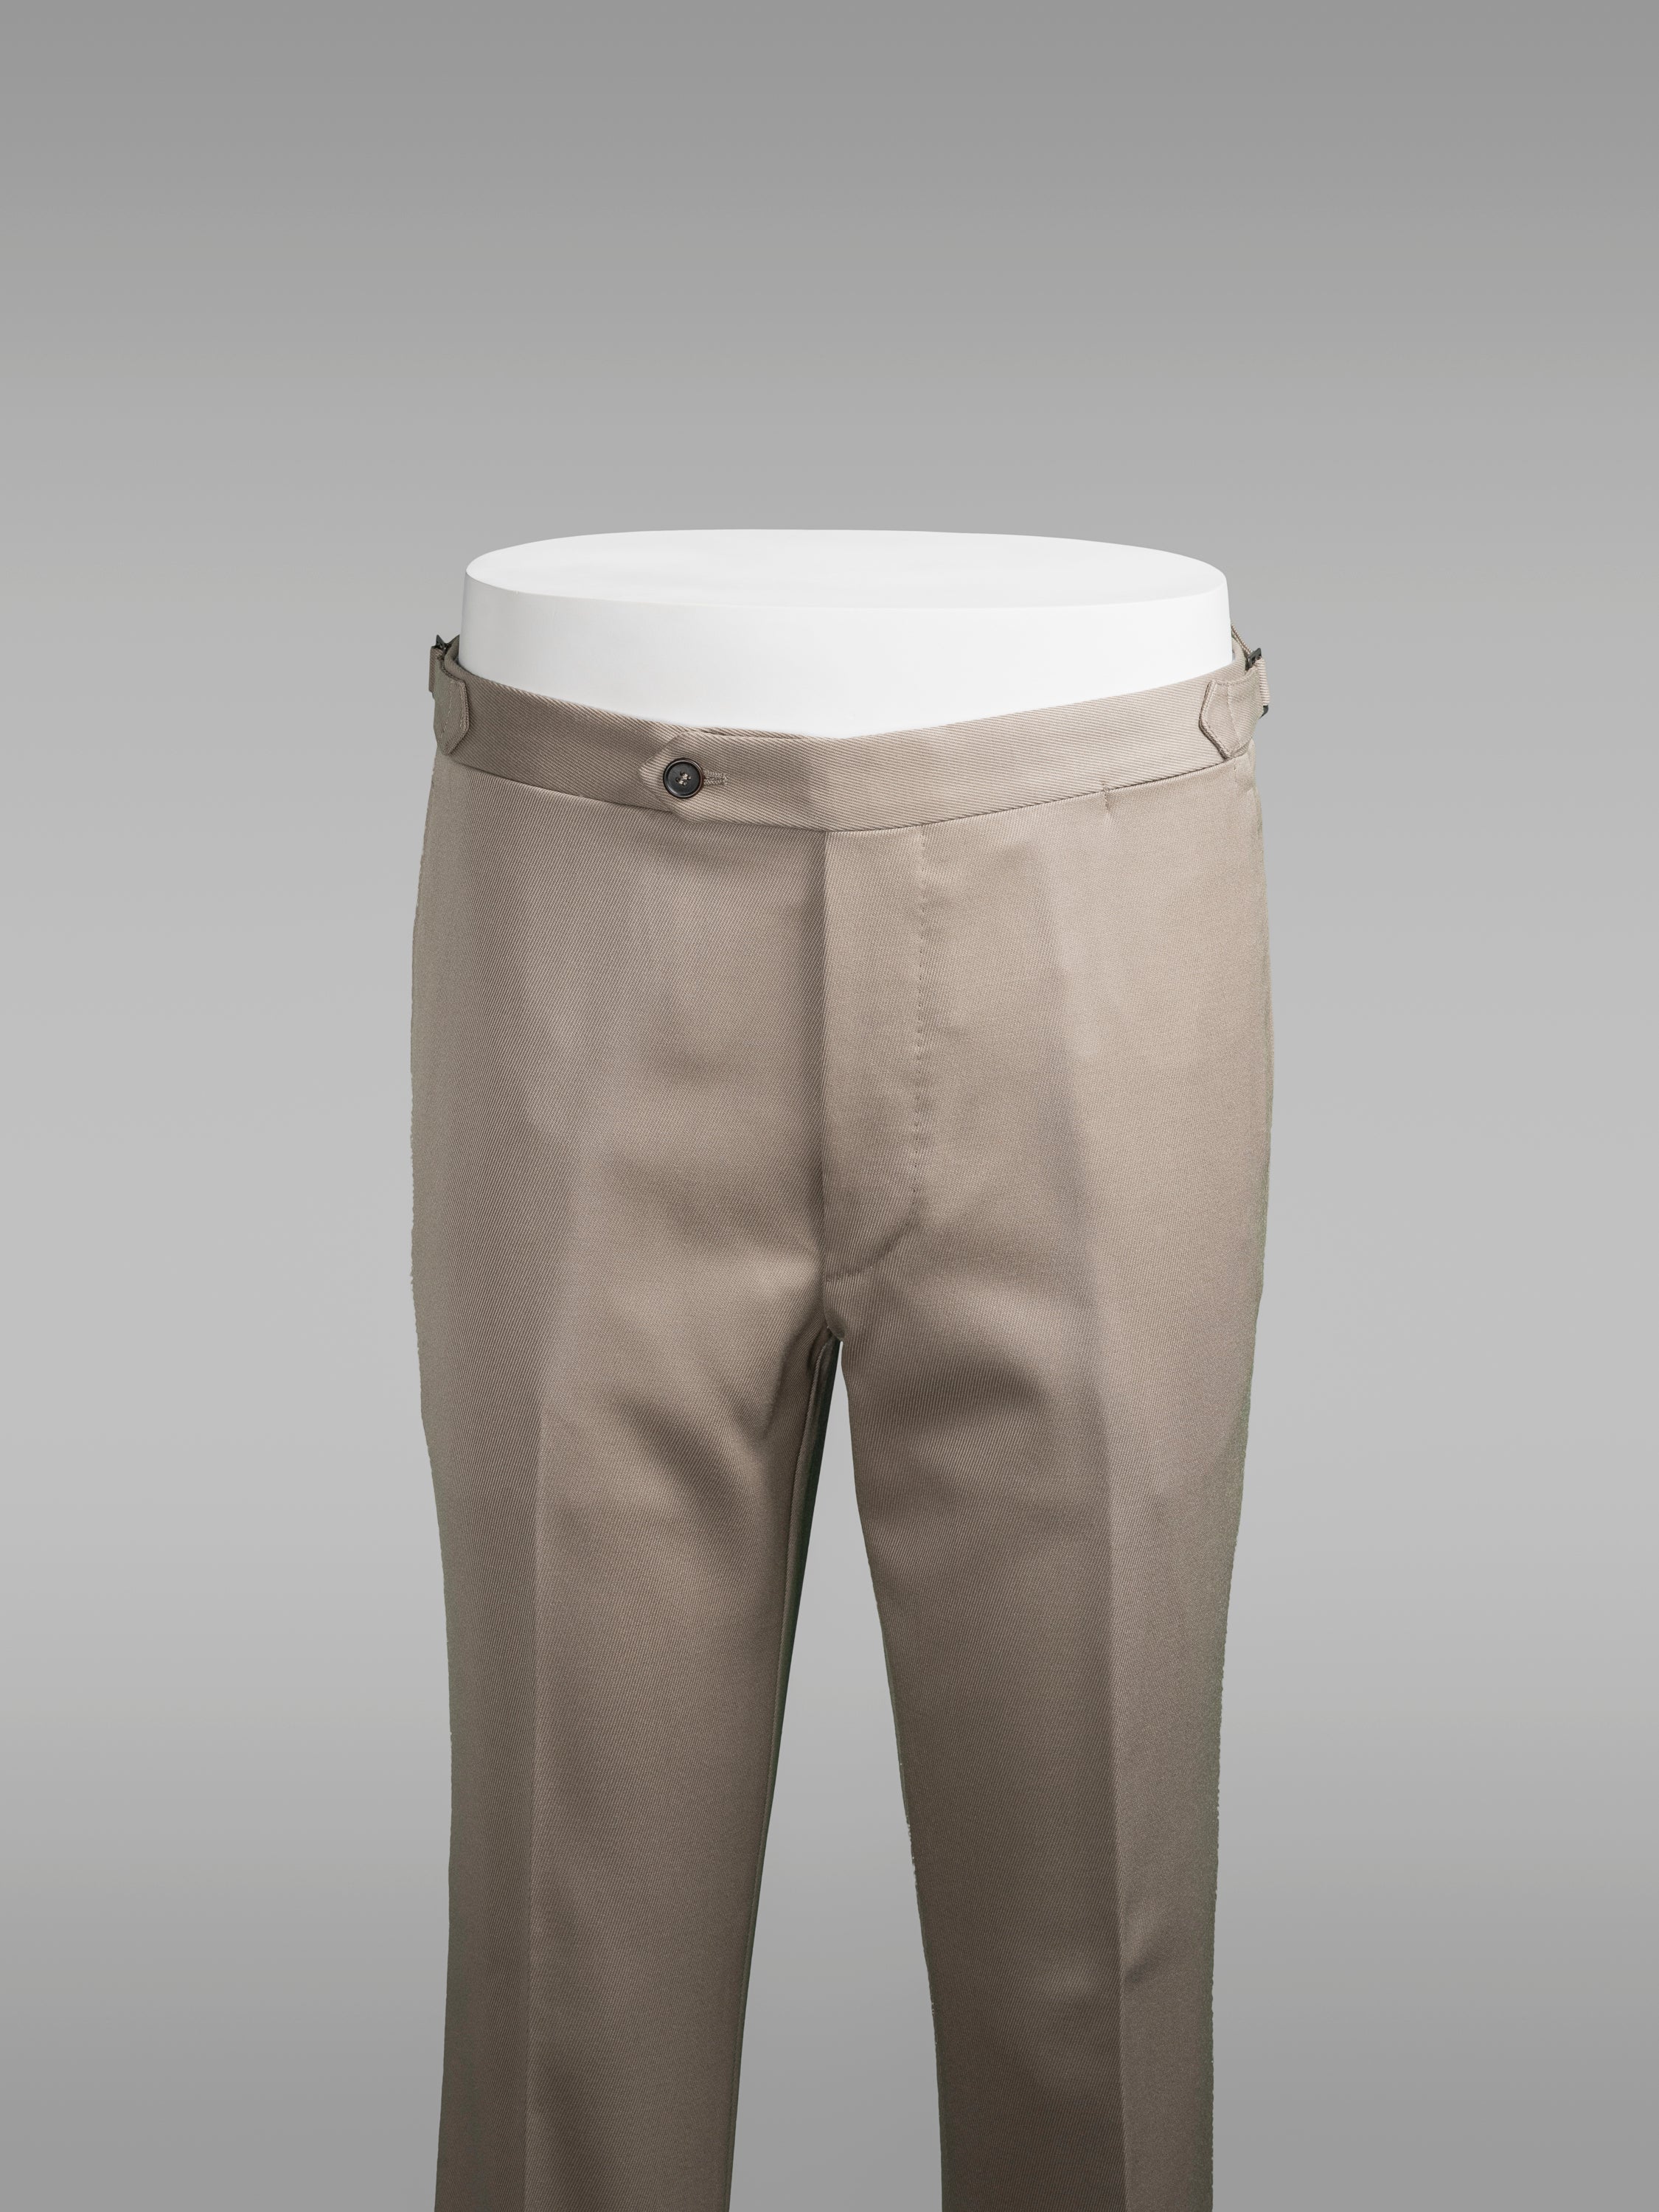 Beige pair of regular fit cavalry twill wool trousers